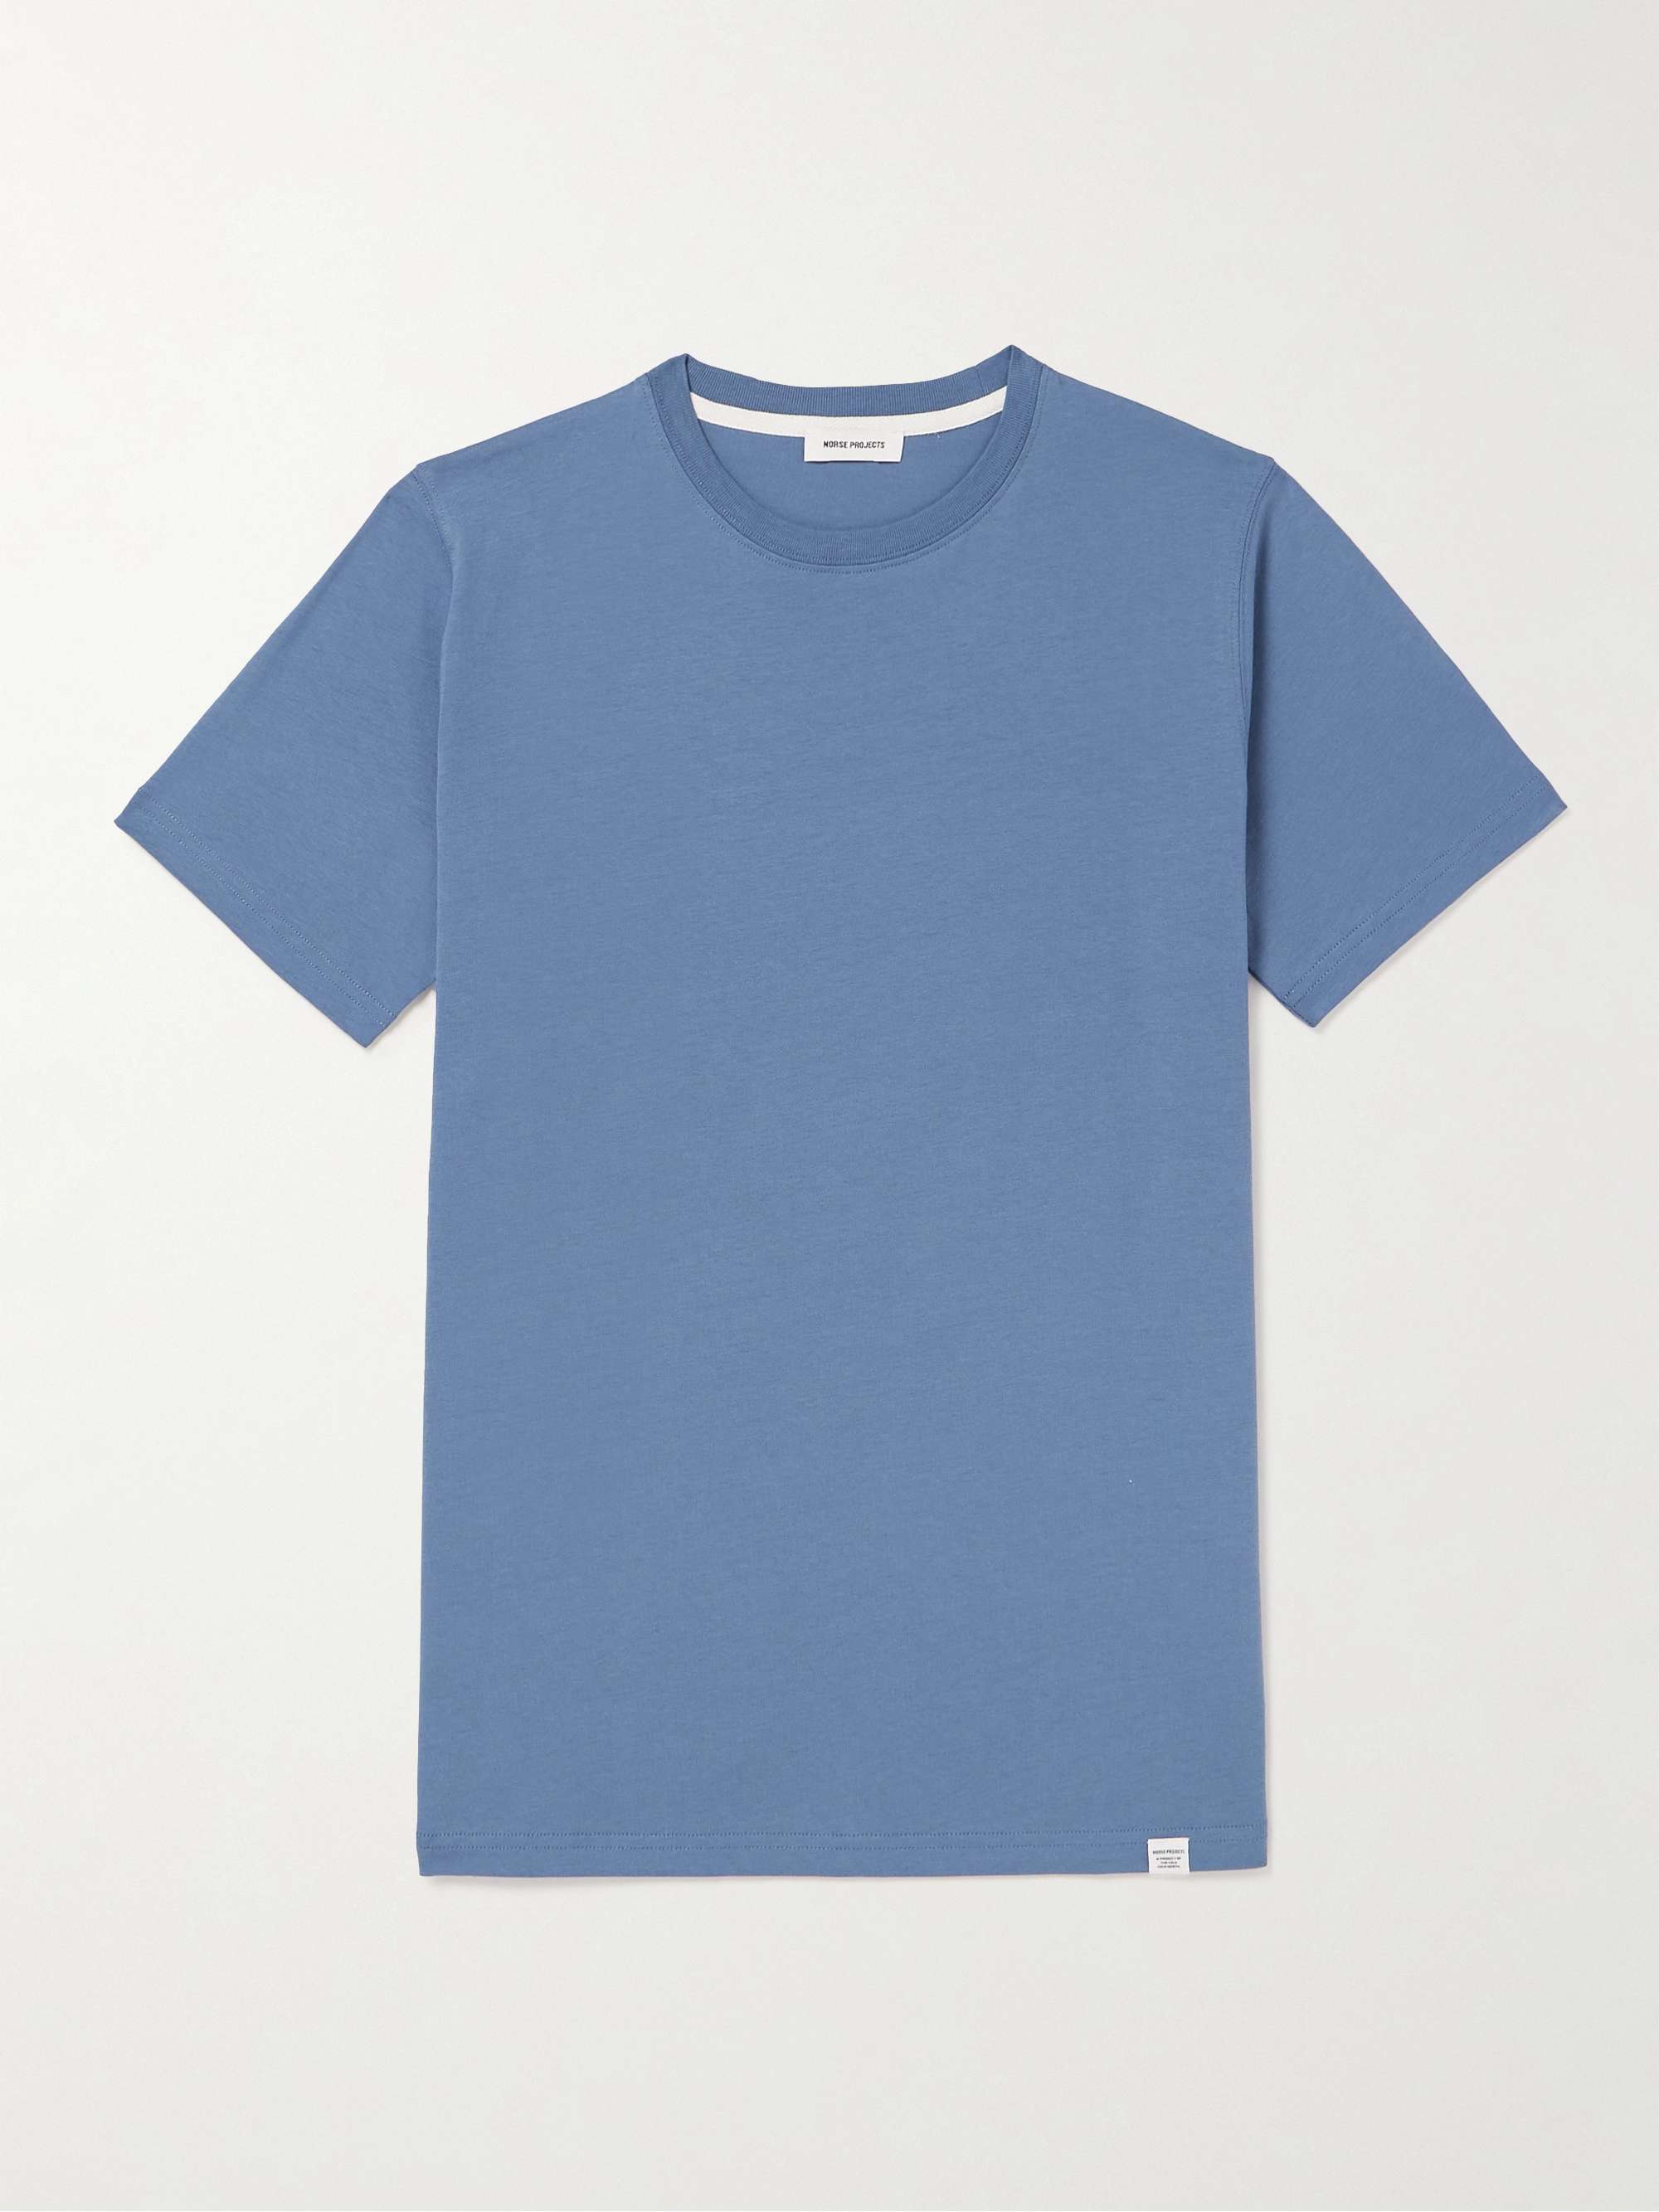 NORSE PROJECTS Niels Organic Cotton-Jersey T-Shirt for Men | MR PORTER